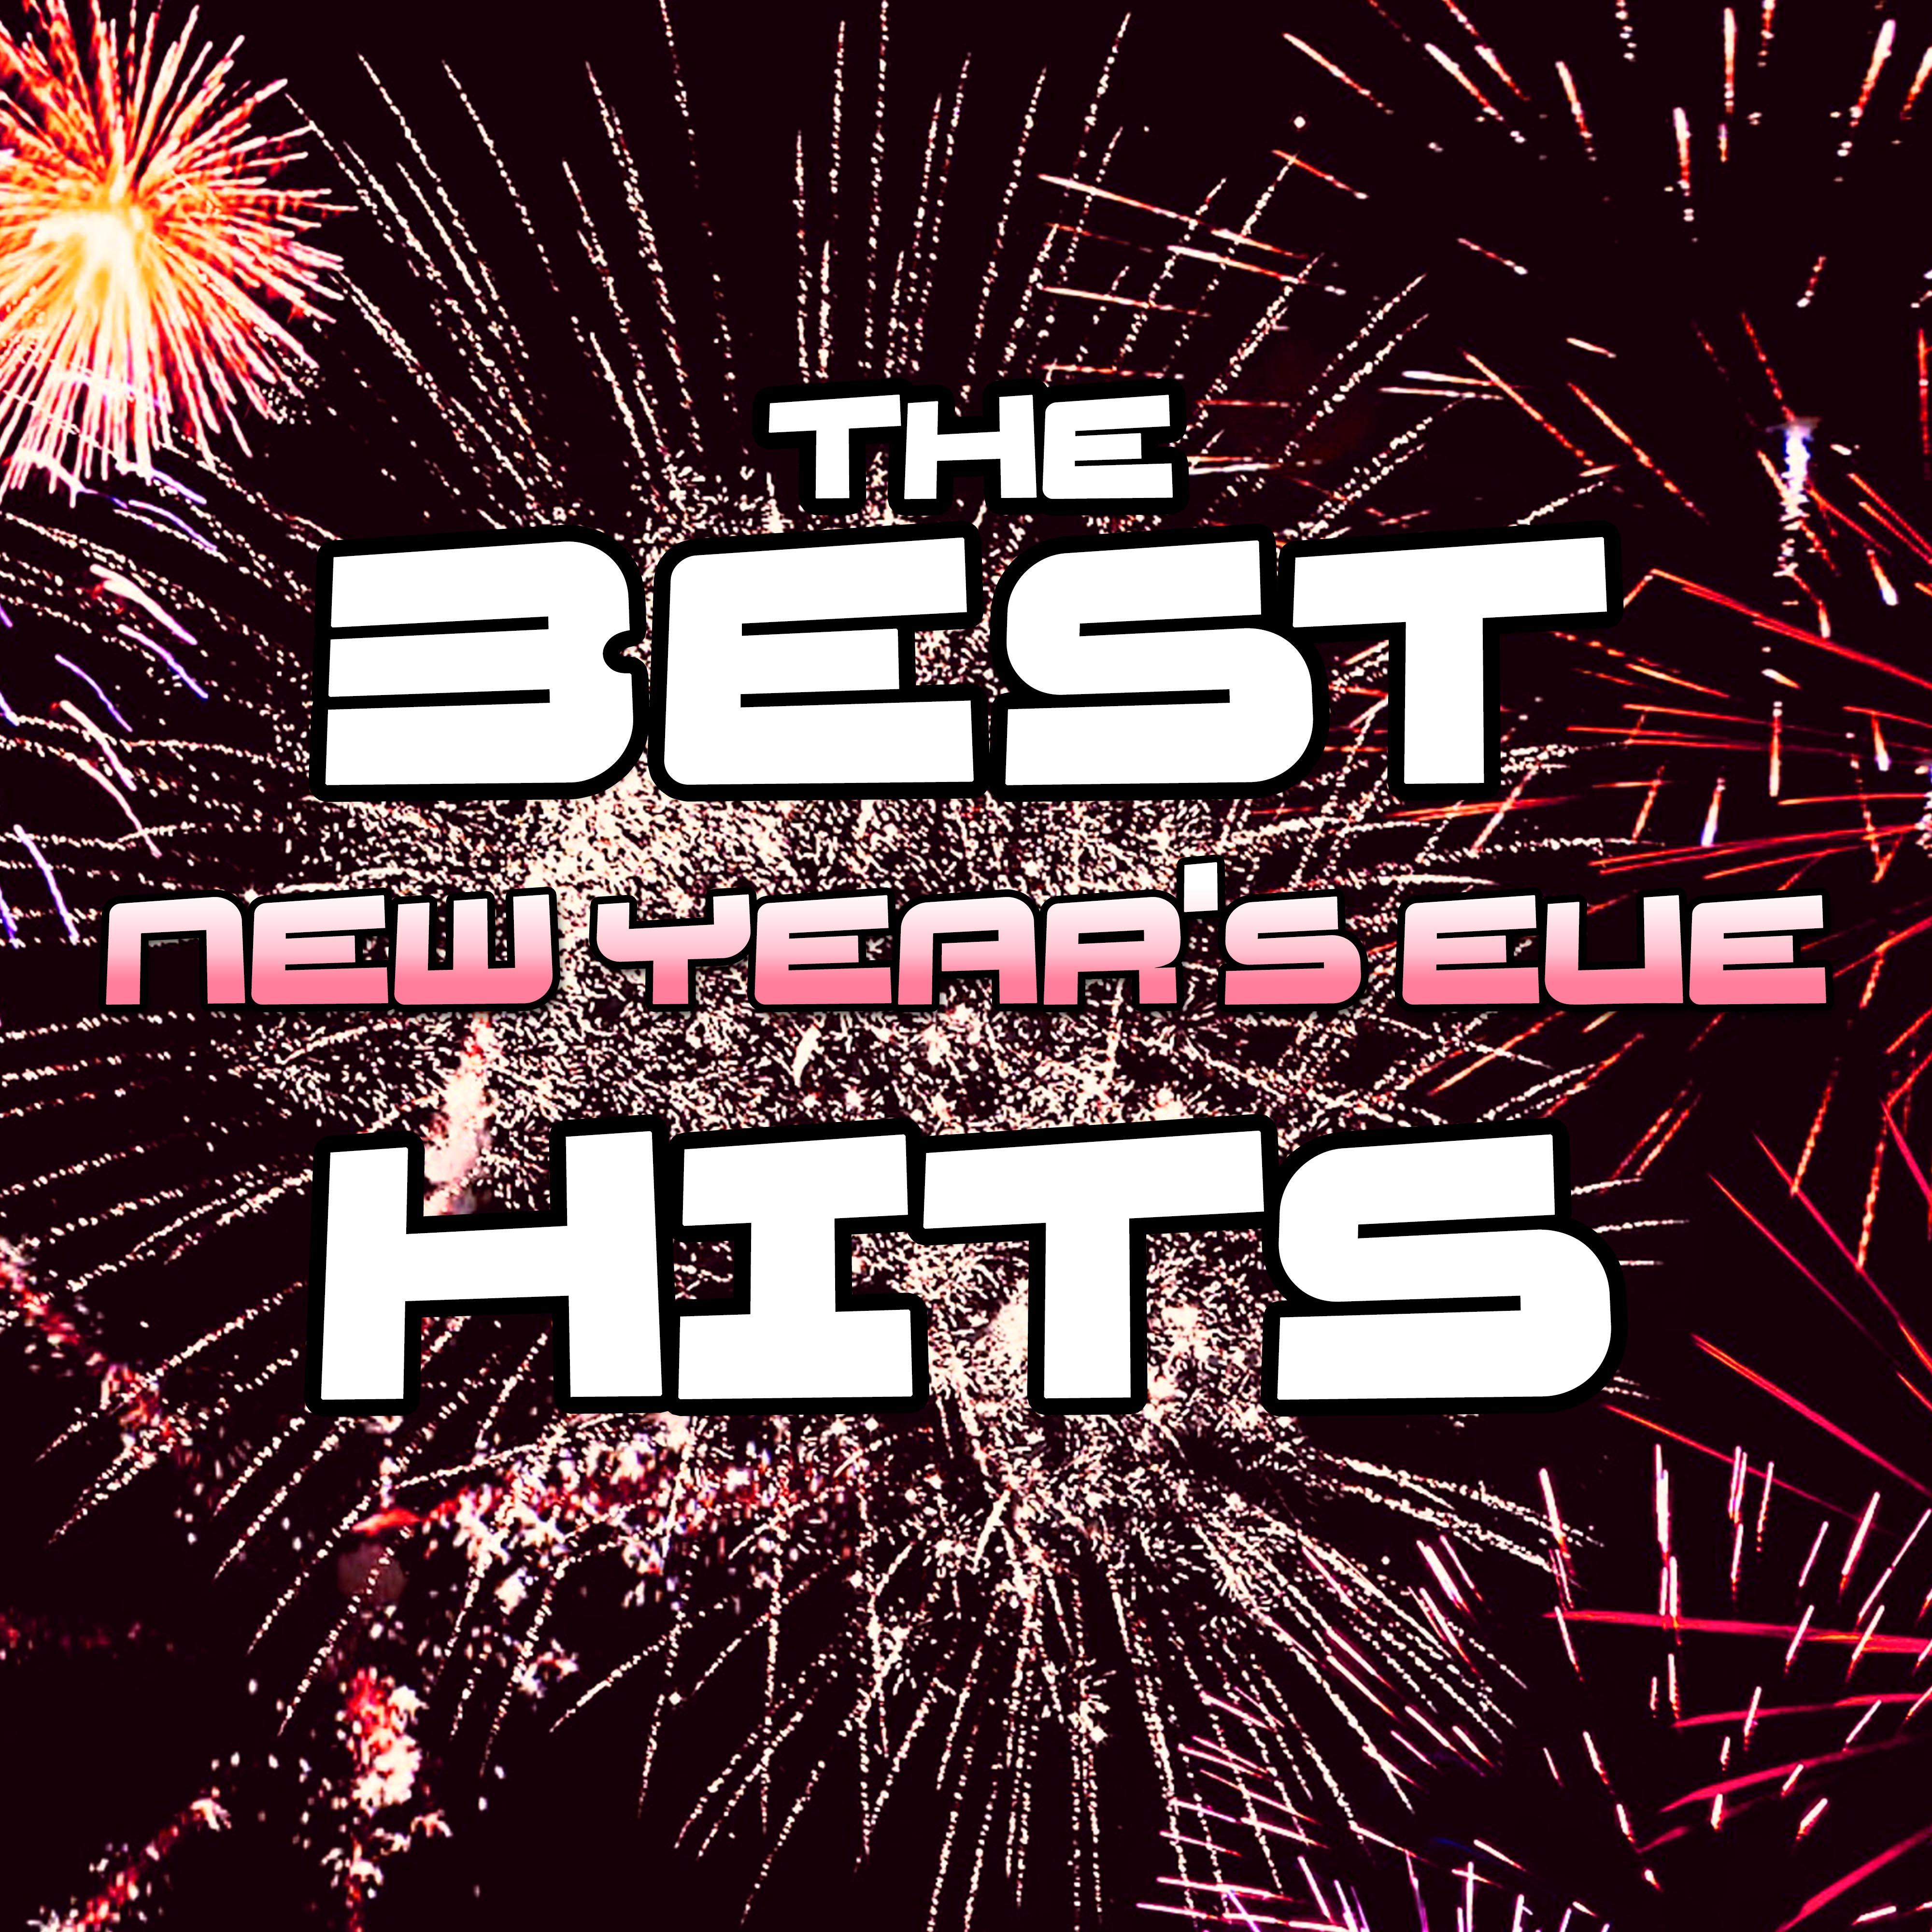 The Best New Year's Eve Hits: Celebrations Songs, Erotic Lounge Beats with Smooth Jazz Vibes to perfectly End your Year